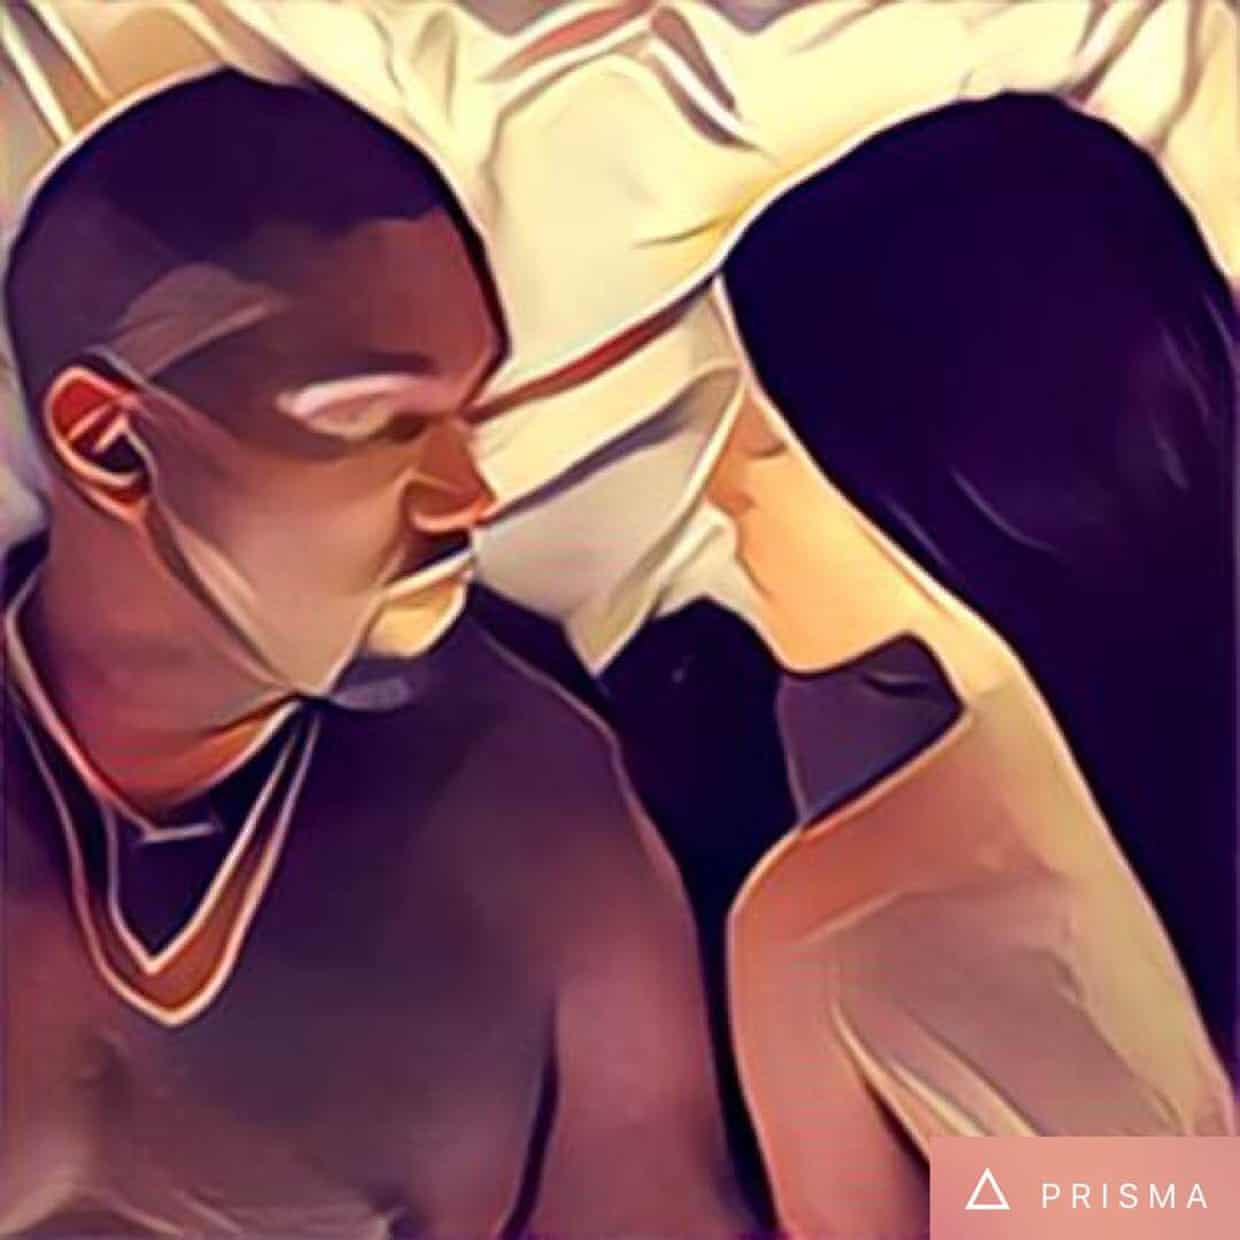 A still from Kanye West and Kim Kardashian in West's music video for Famous.